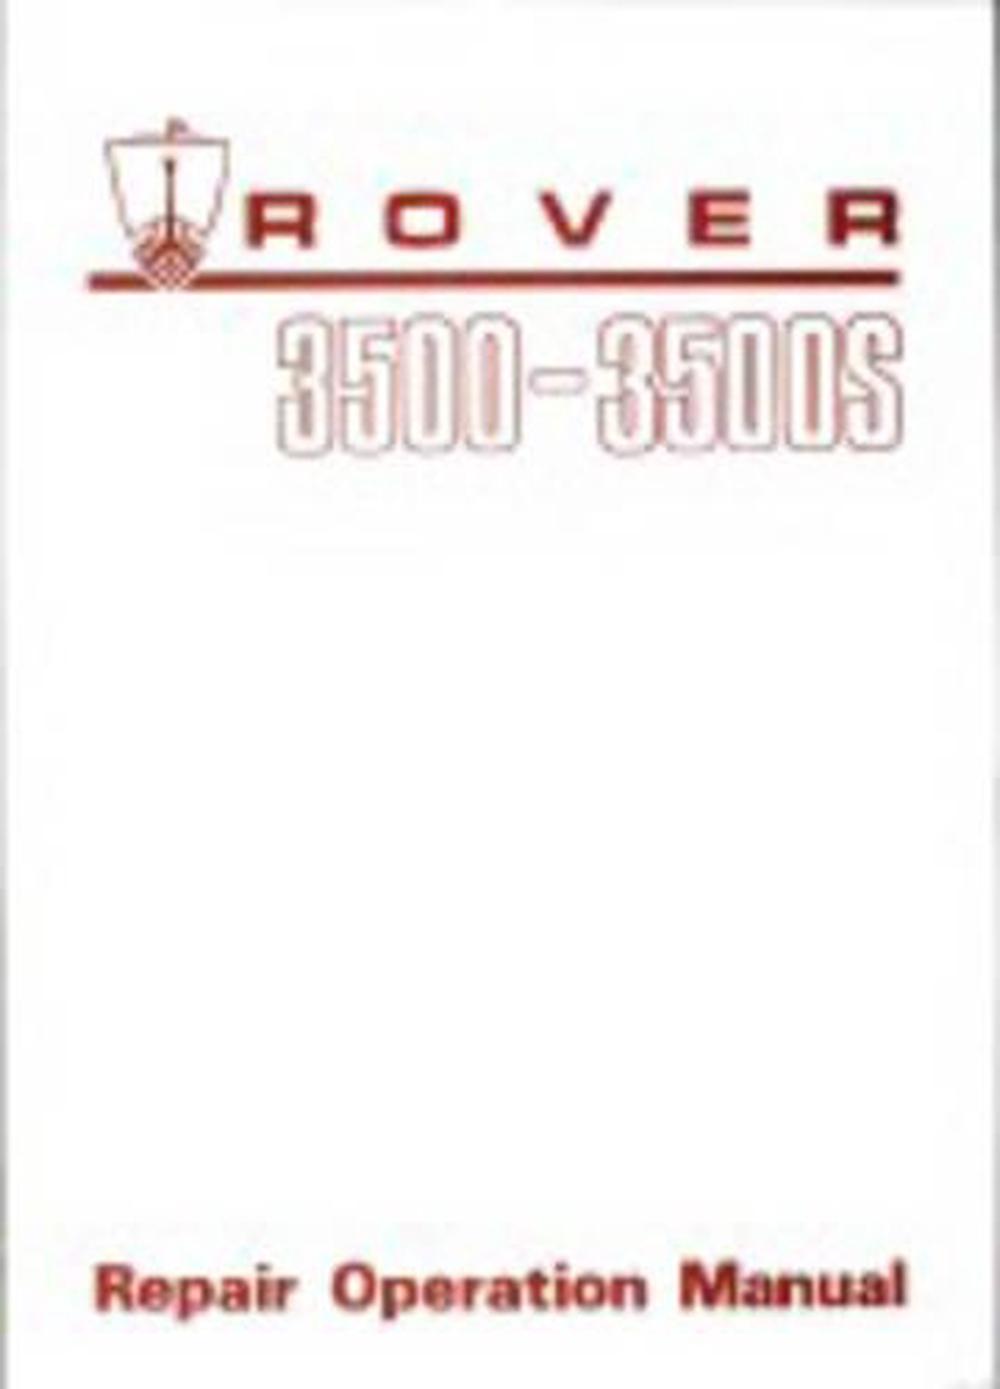 Rover 35003500s Repair Operation Manual by Brooklands Books Ltd (English) Paper 9781855201156